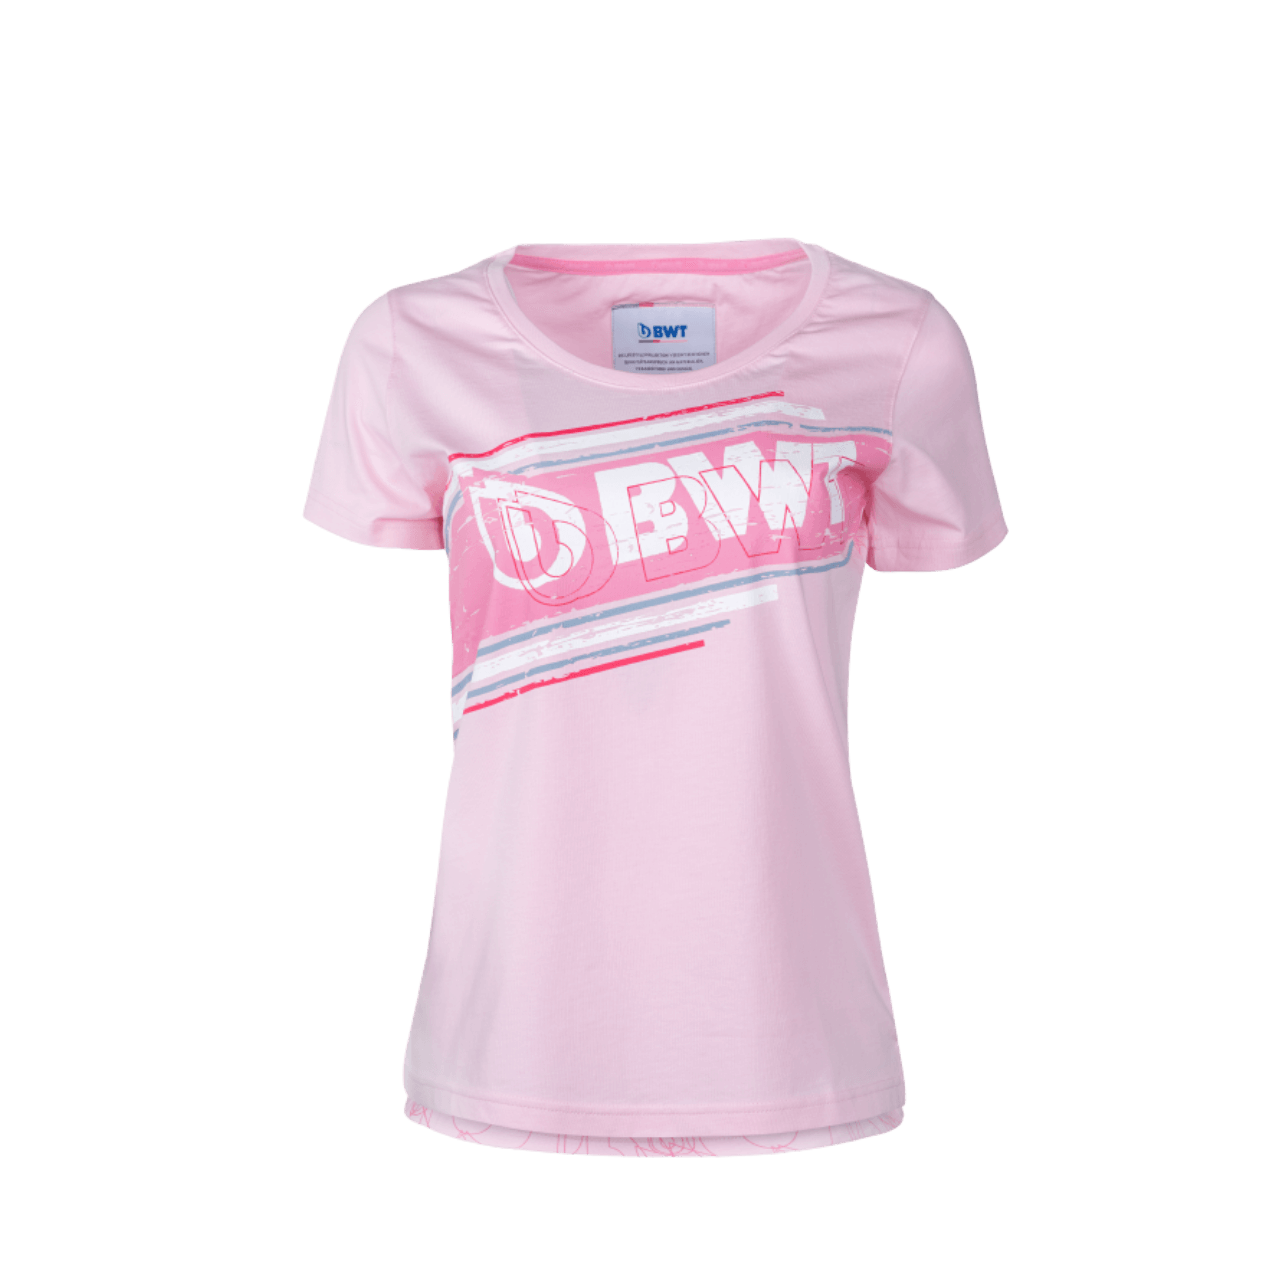 BWT Lifestyle T-Shirt Ladies pink with white BWT logo on pink background